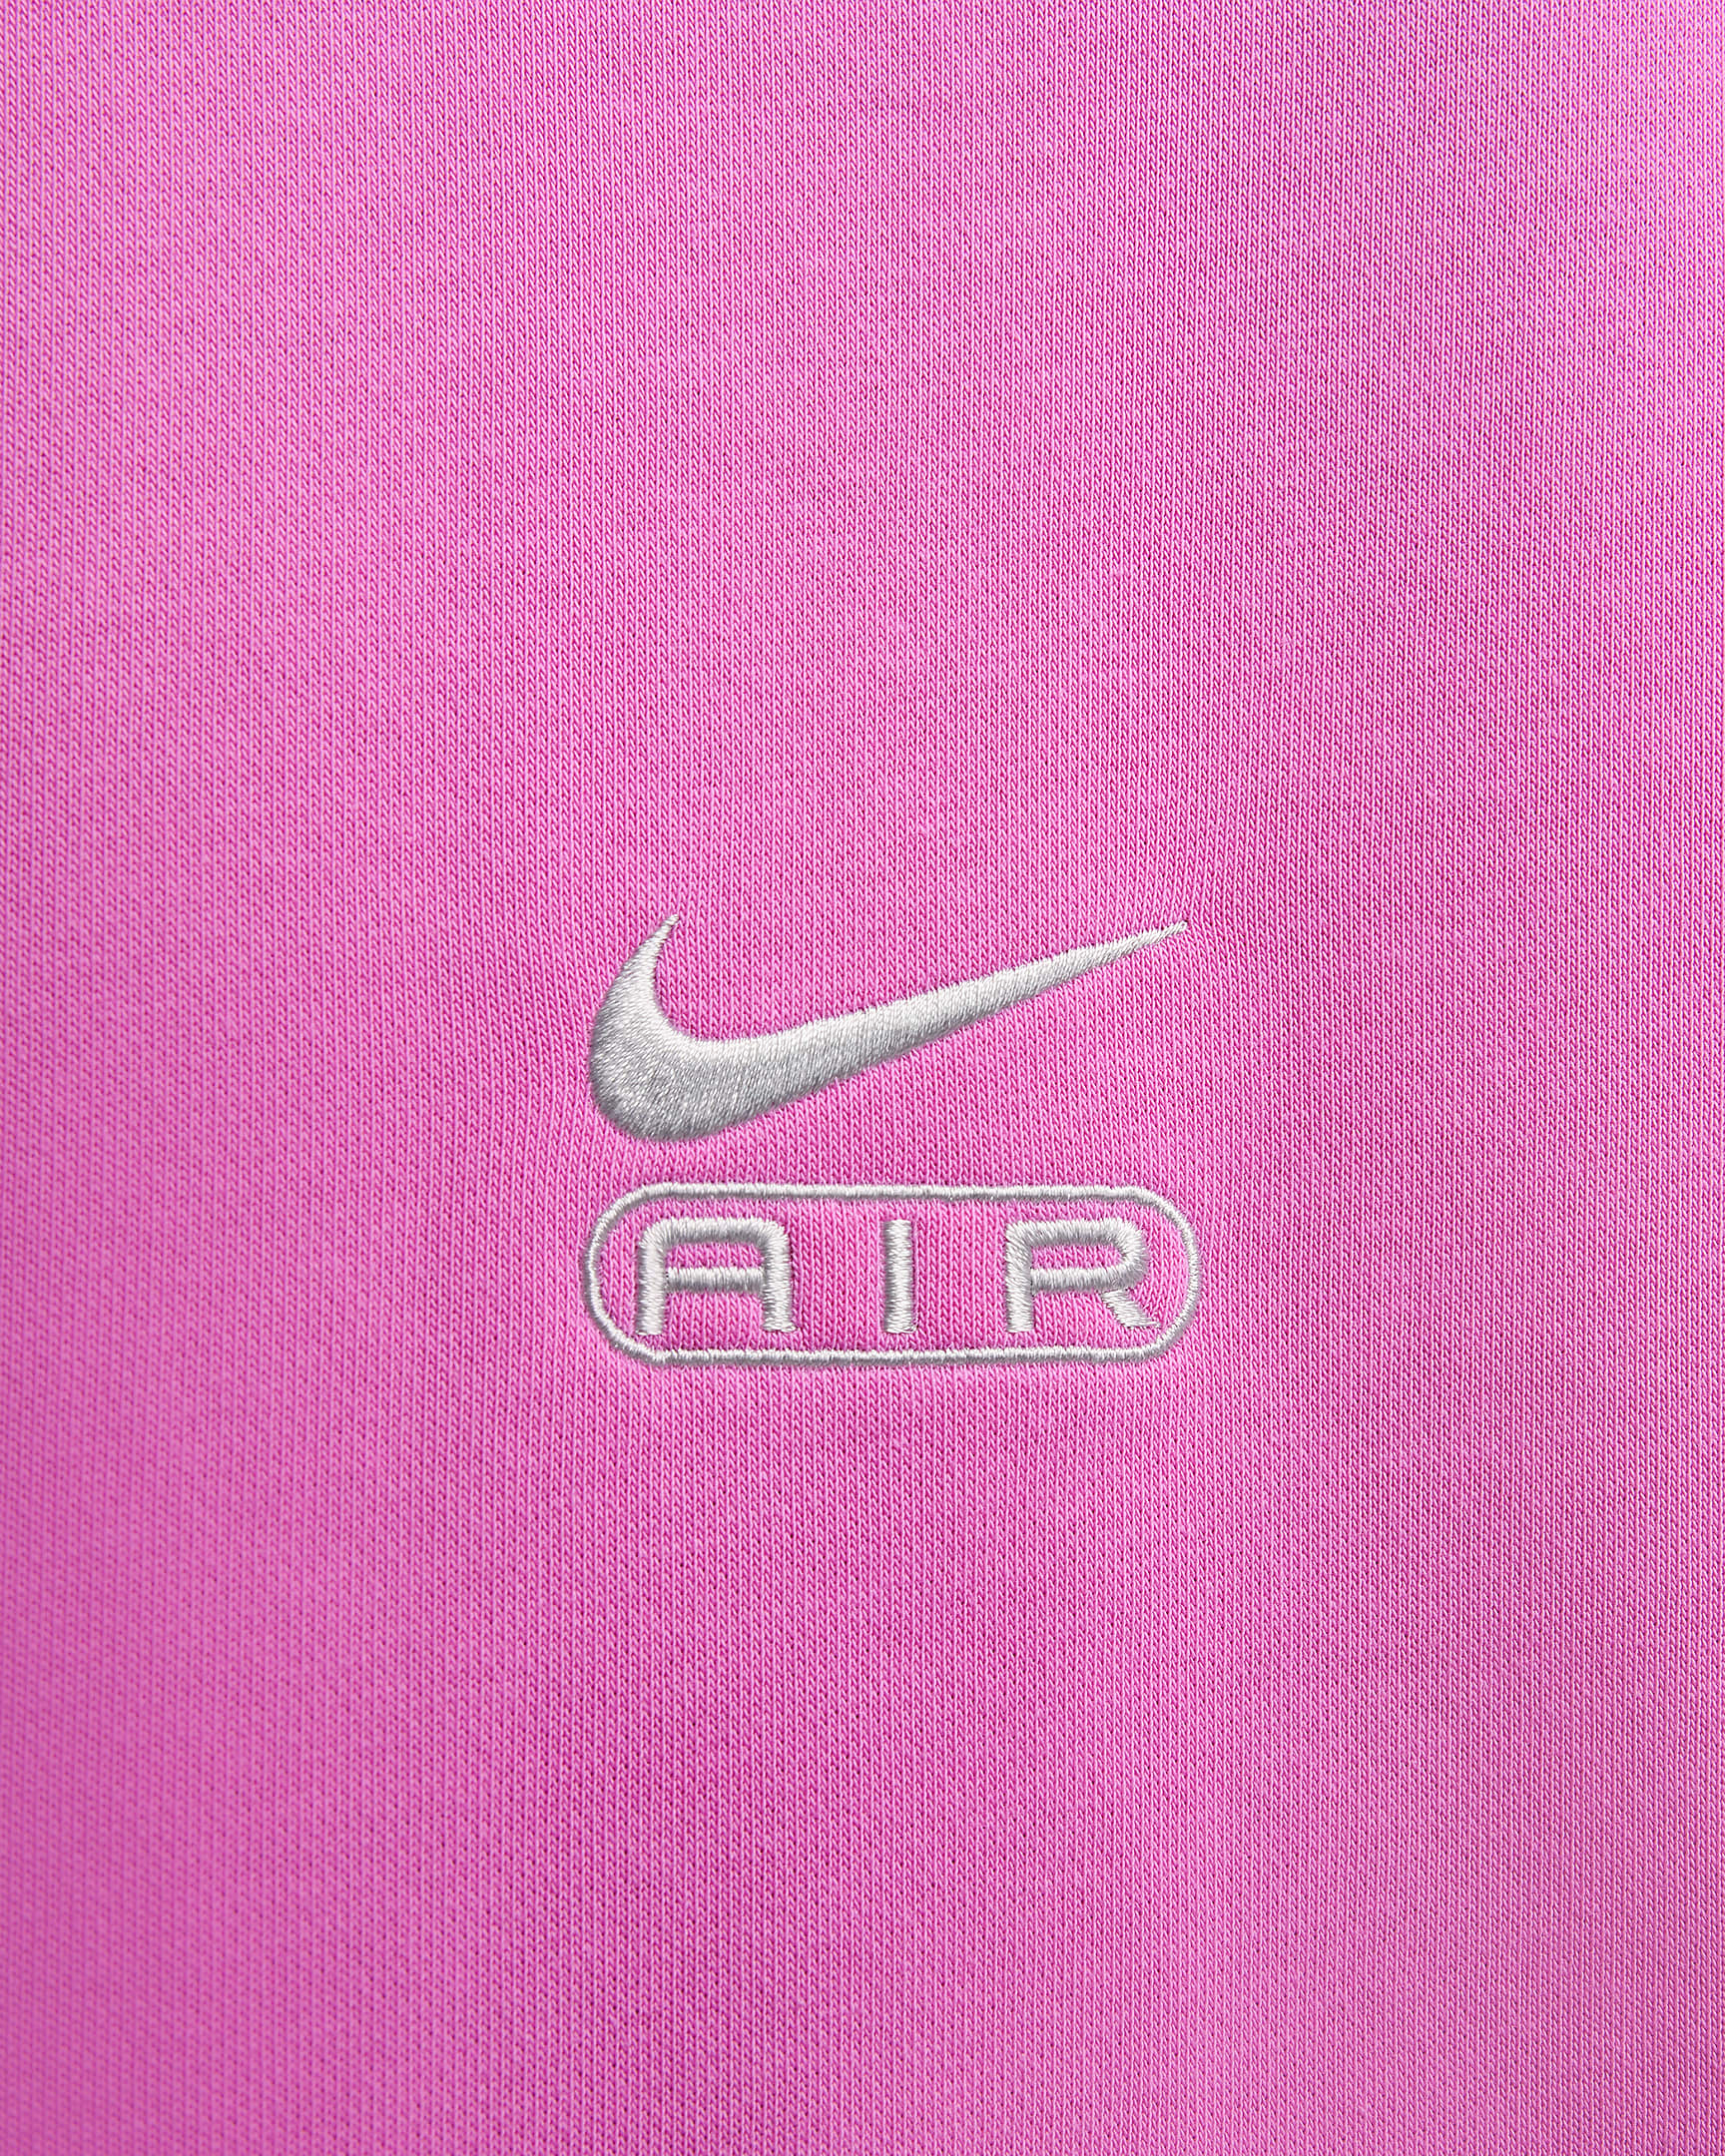 Nike Air Women's Over-Oversized Crew-Neck French Terry Sweatshirt - Playful Pink/Photon Dust